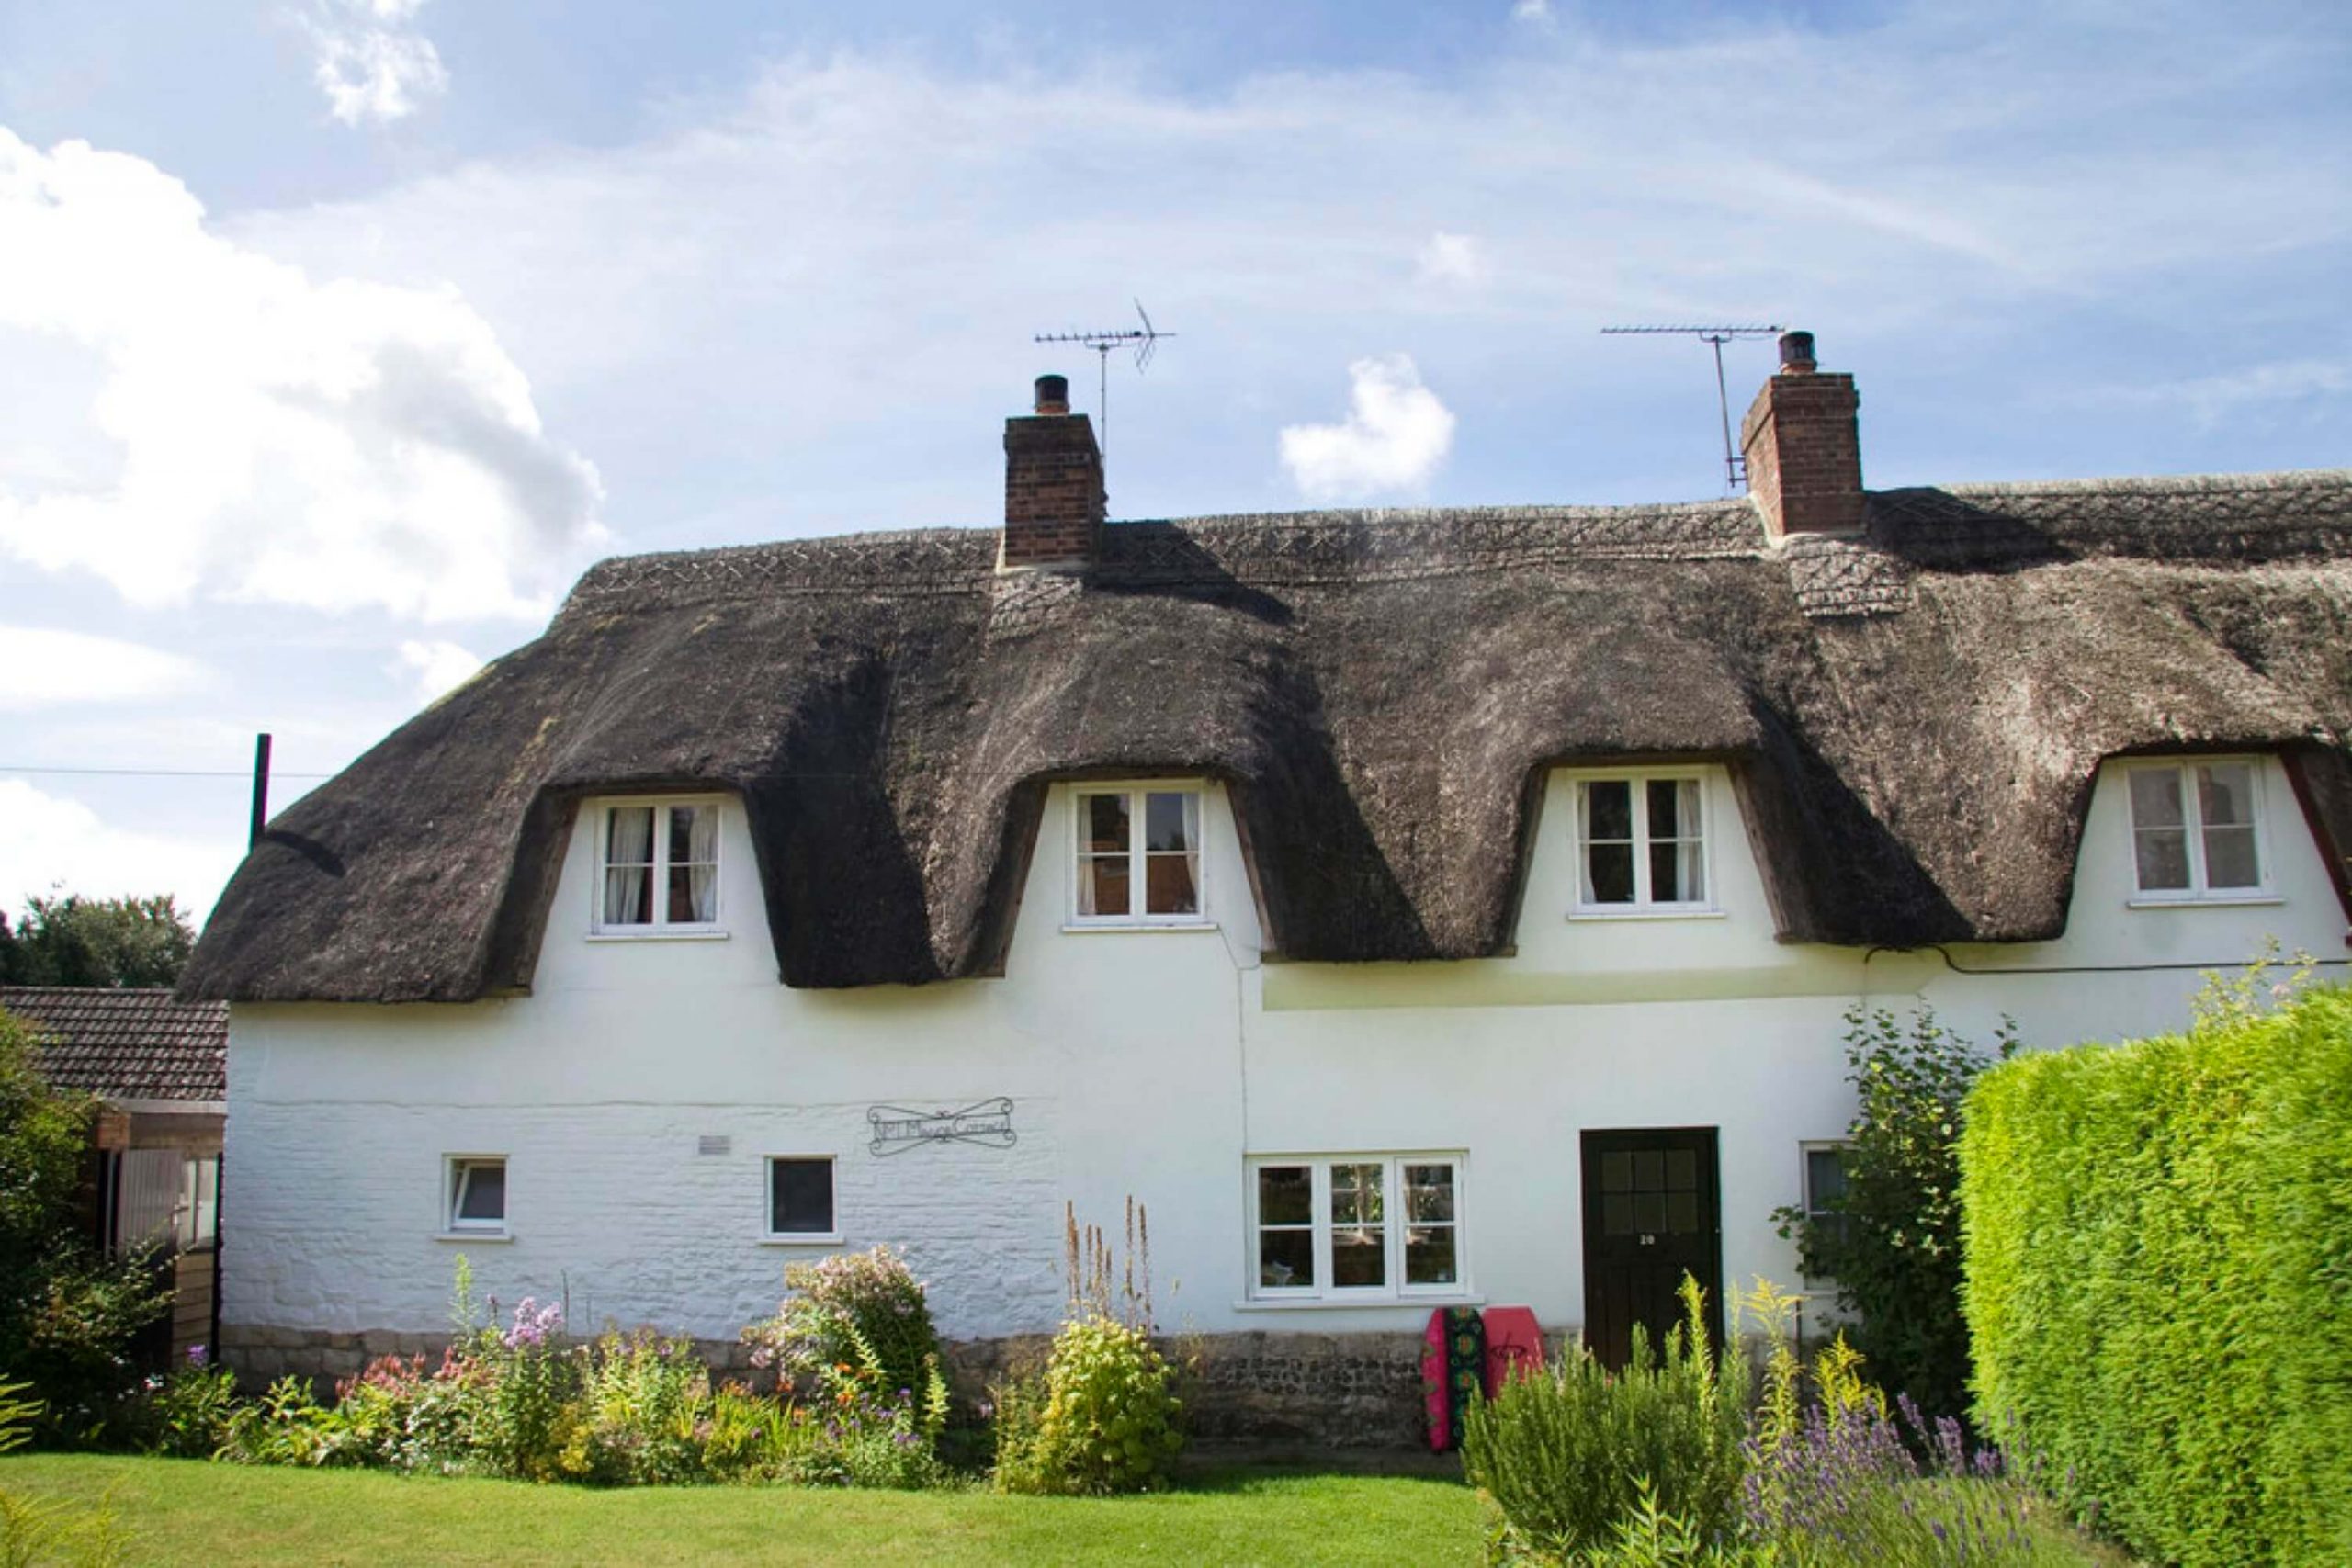 How Long Does a Thatched Roof Last